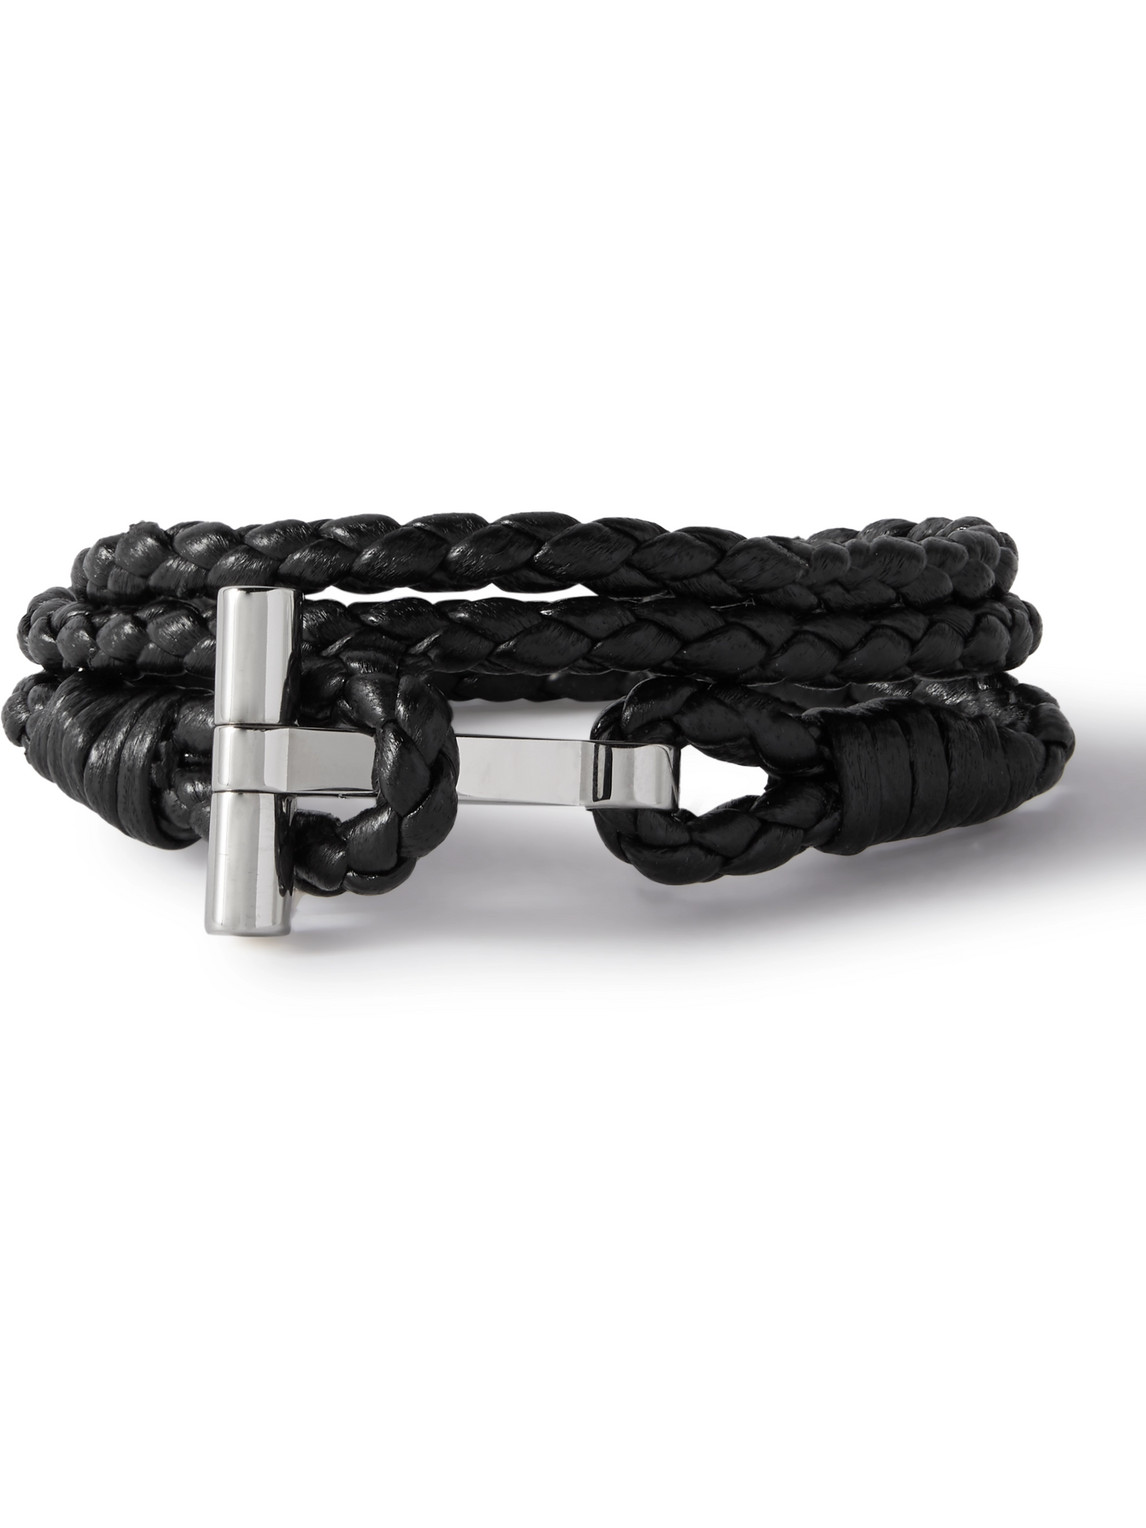 TOM FORD - Woven Leather and Silver-Tone Wrap Bracelet - Men - Black - M von TOM FORD